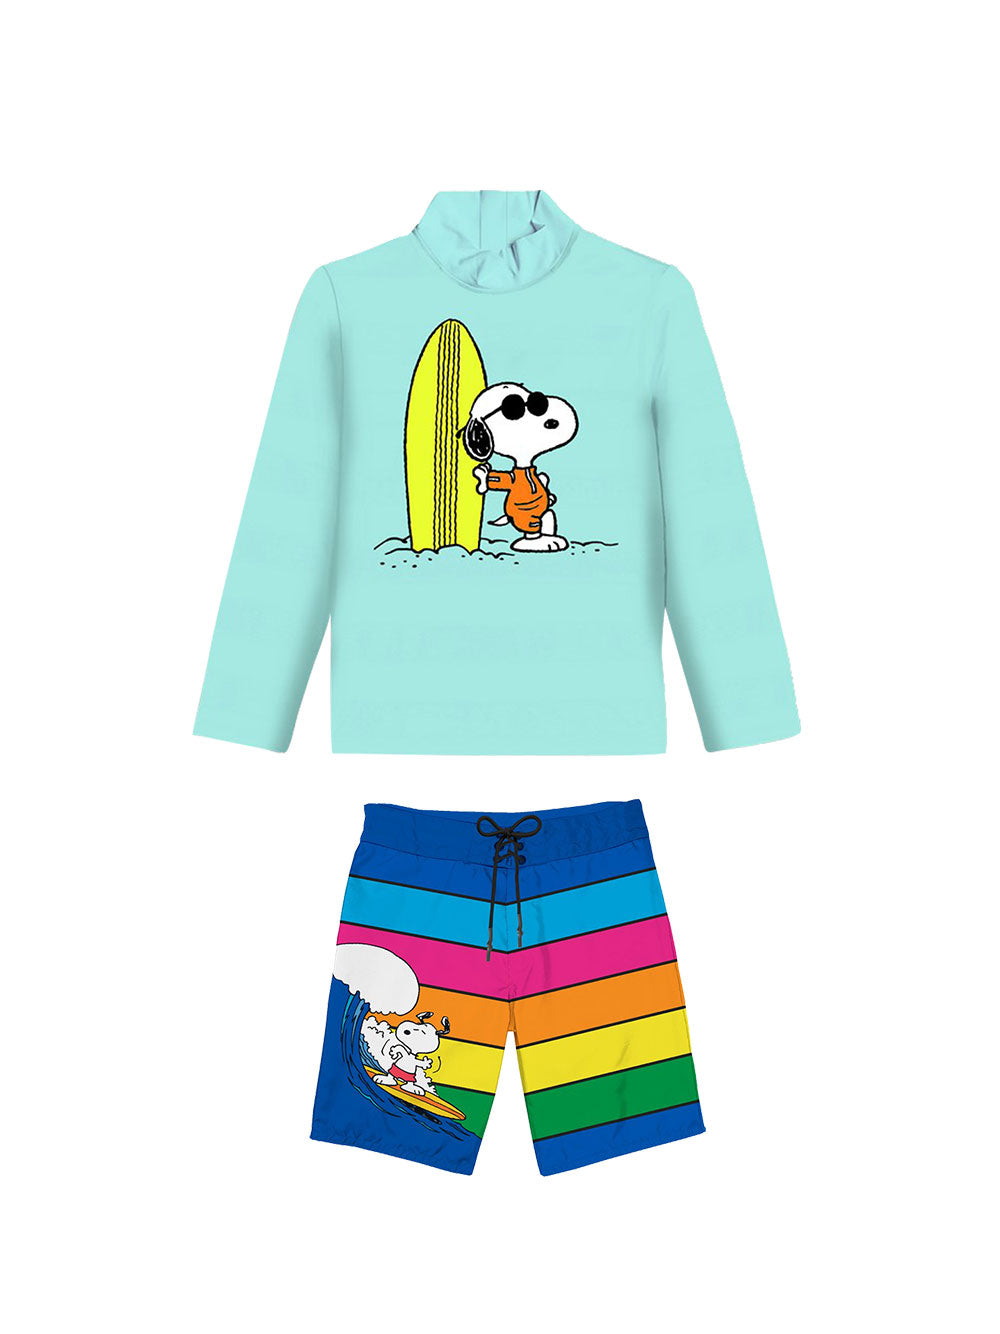 Comfort Snoopy Surf Shorts